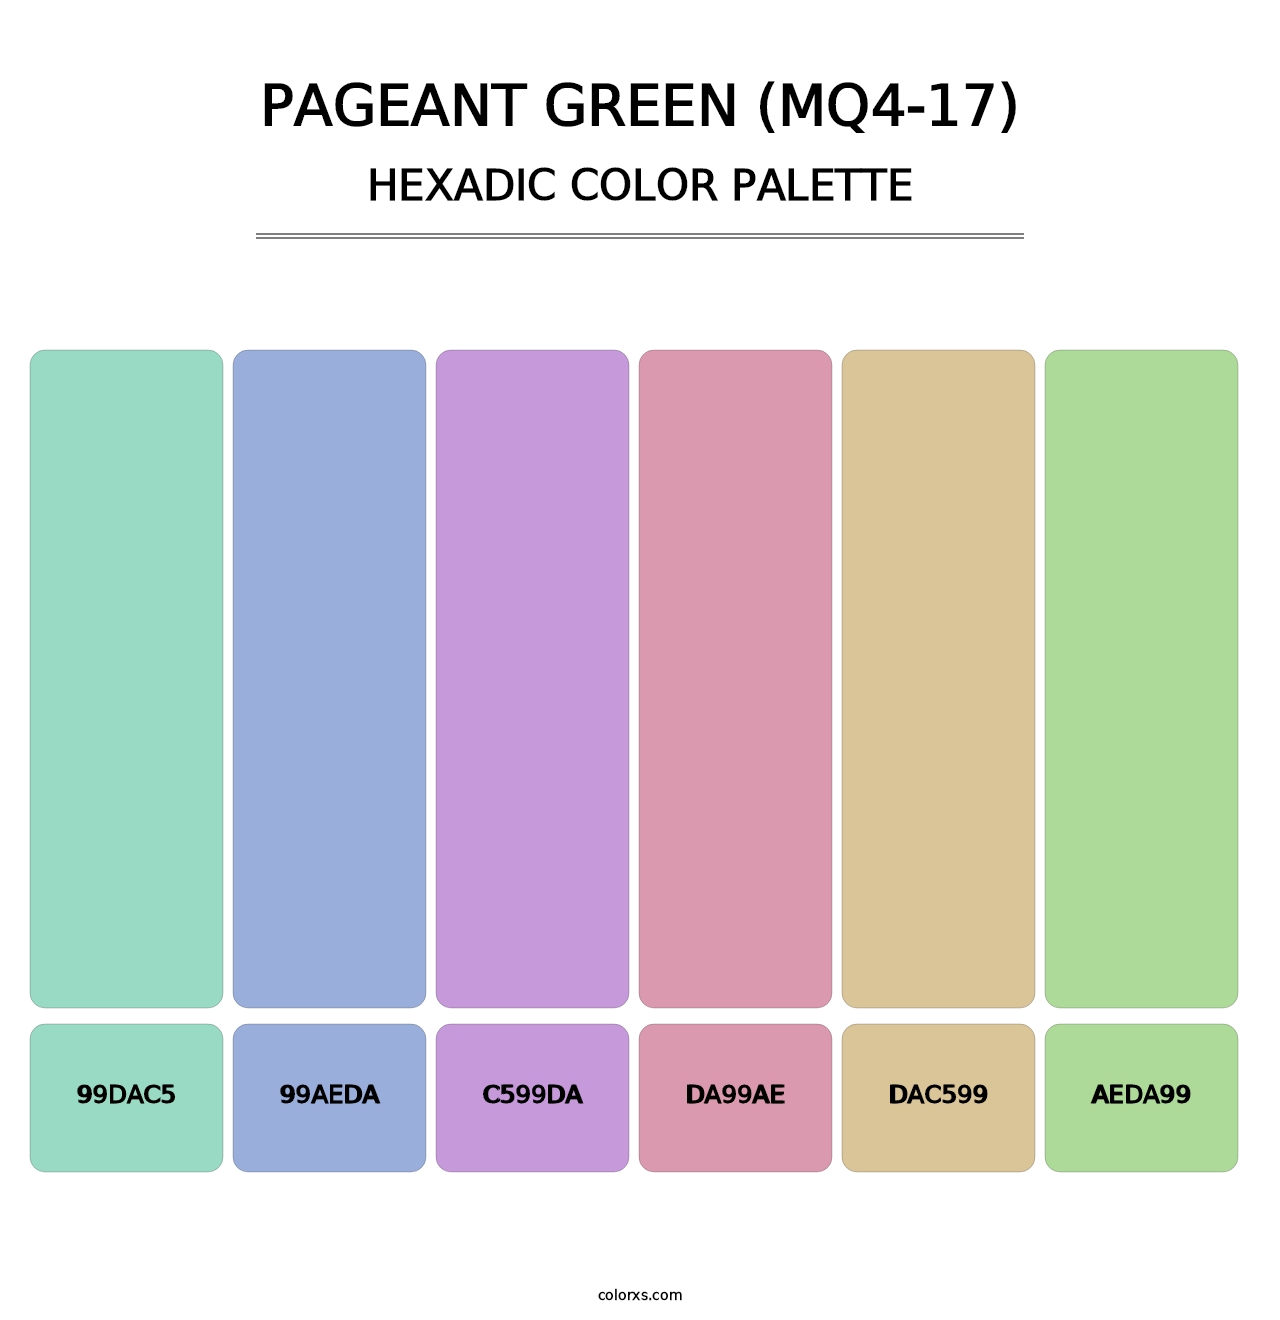 Pageant Green (MQ4-17) - Hexadic Color Palette